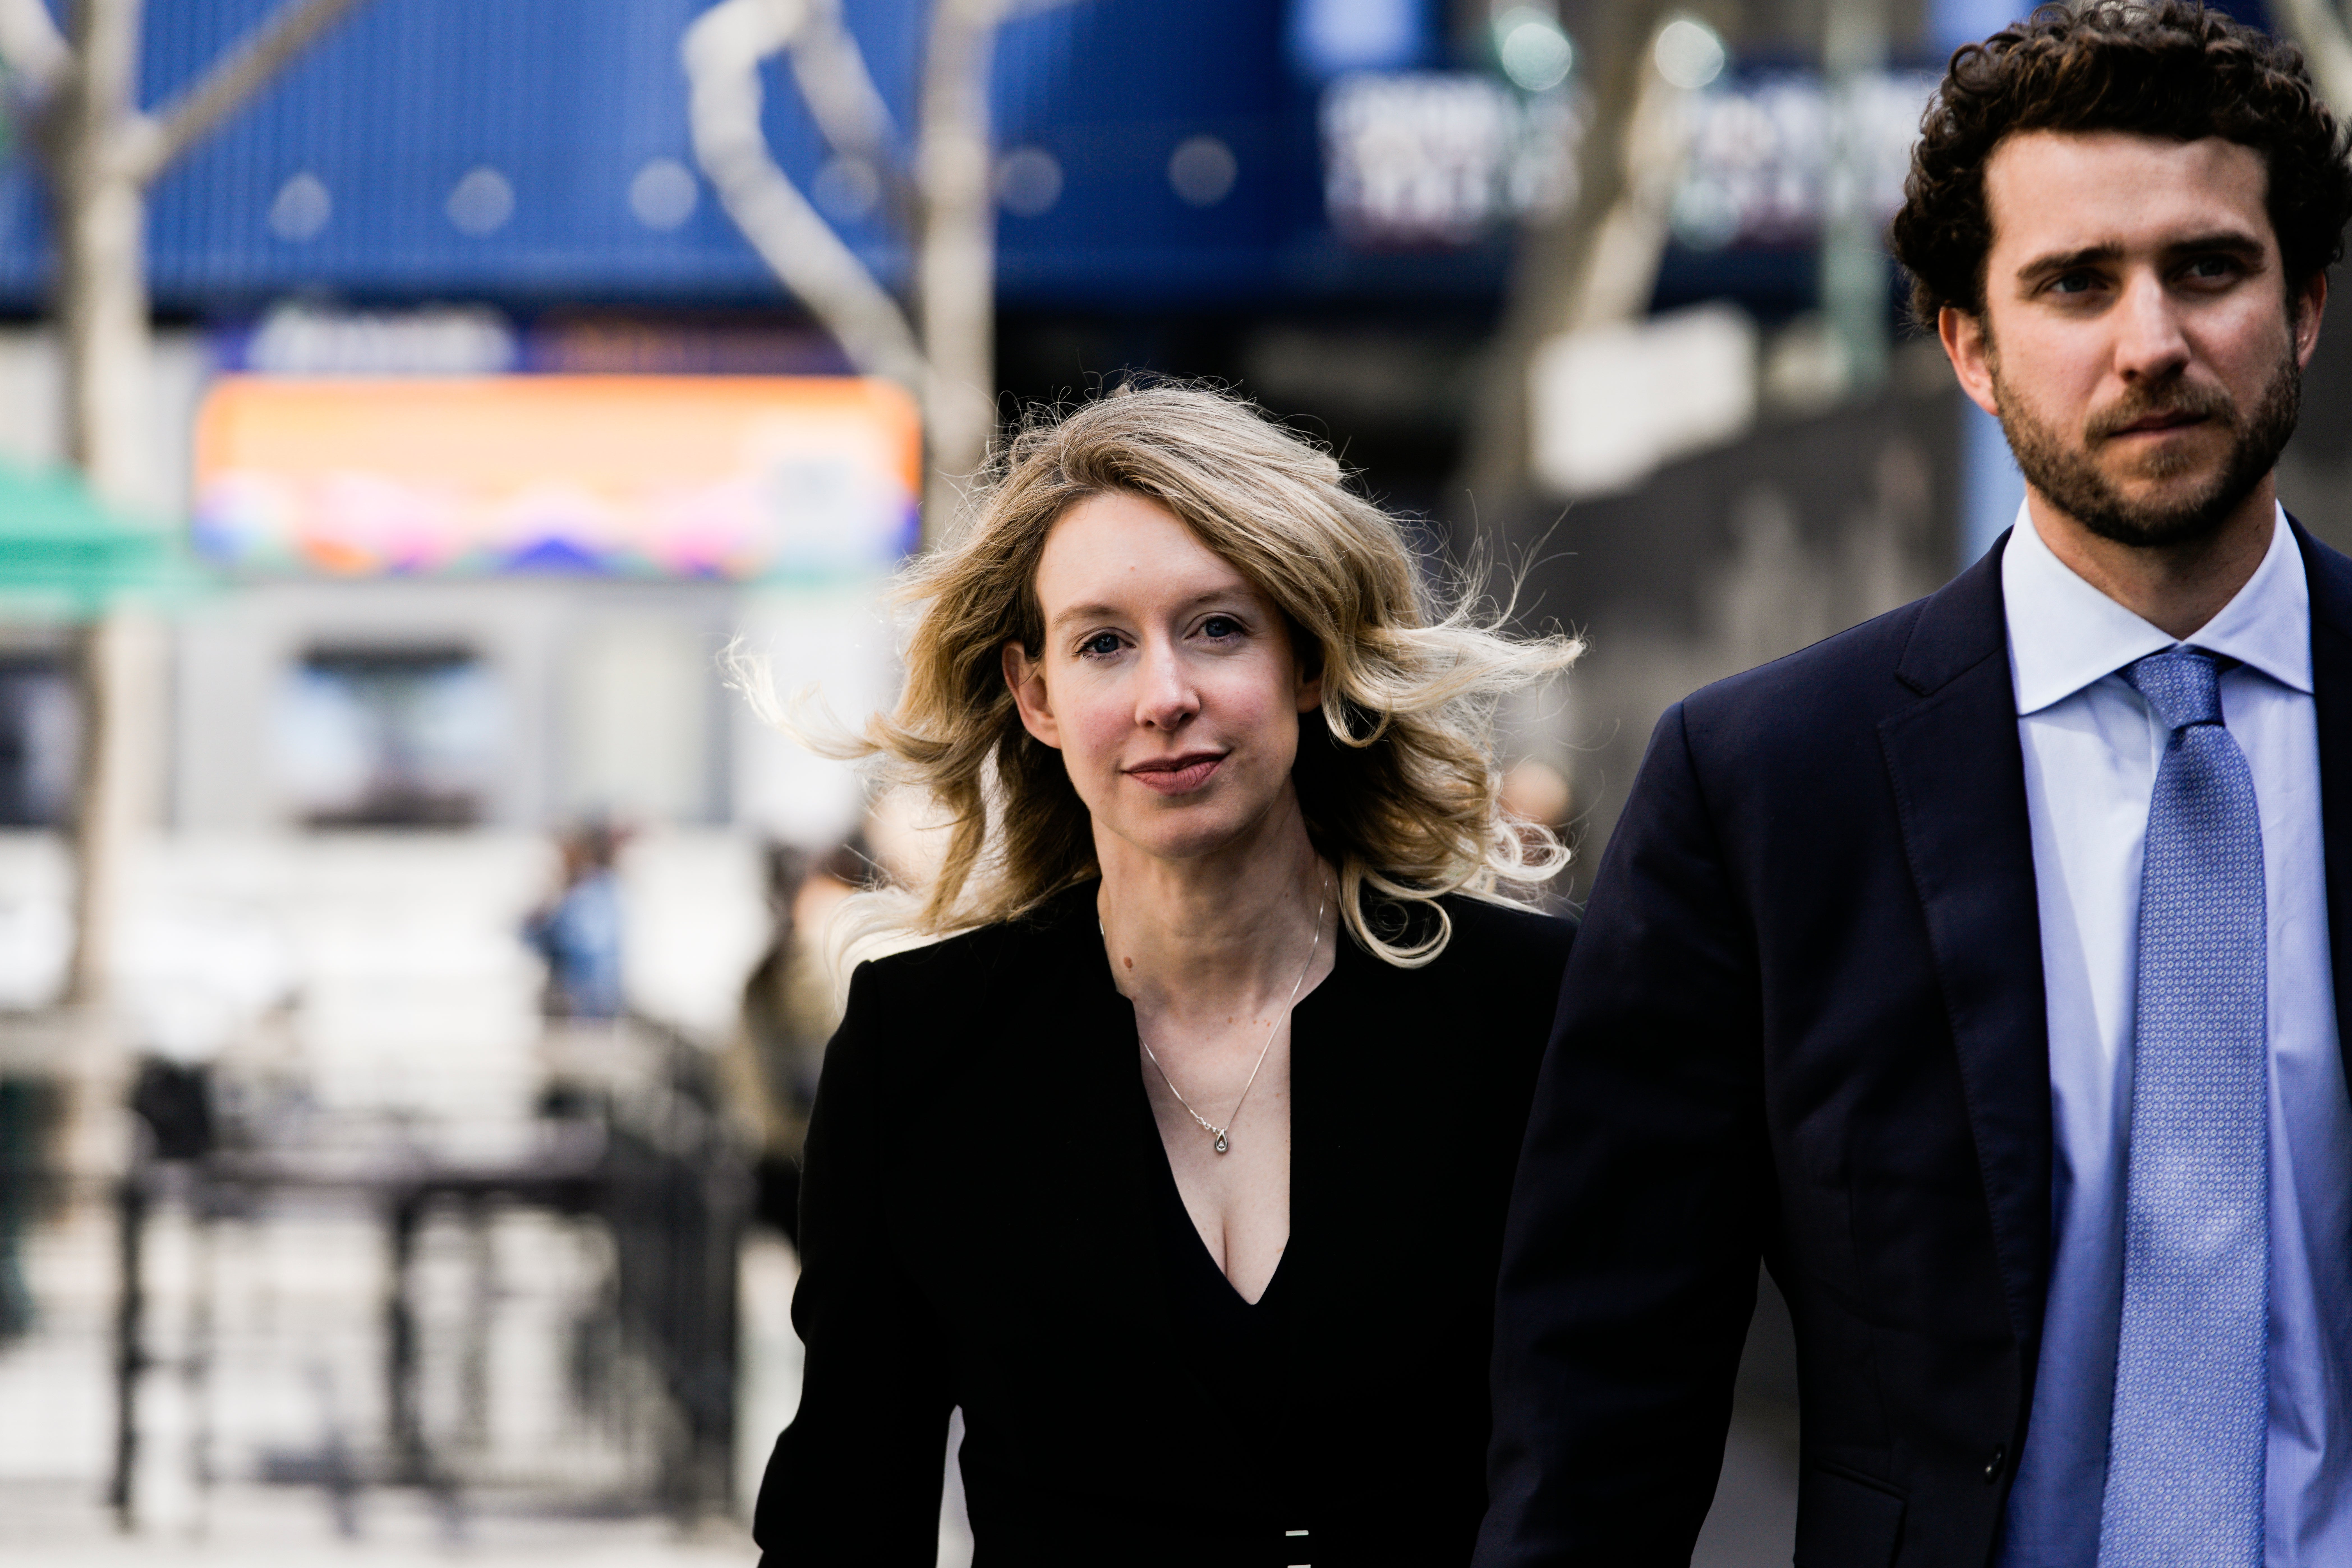 Former Theranos CEO Elizabeth Holmes alongside her boyfriend Billy Evans, walks back to her hotel following a hearing at the Robert E Peckham US Courthouse on 17 March, 2023 in San Jose, California.